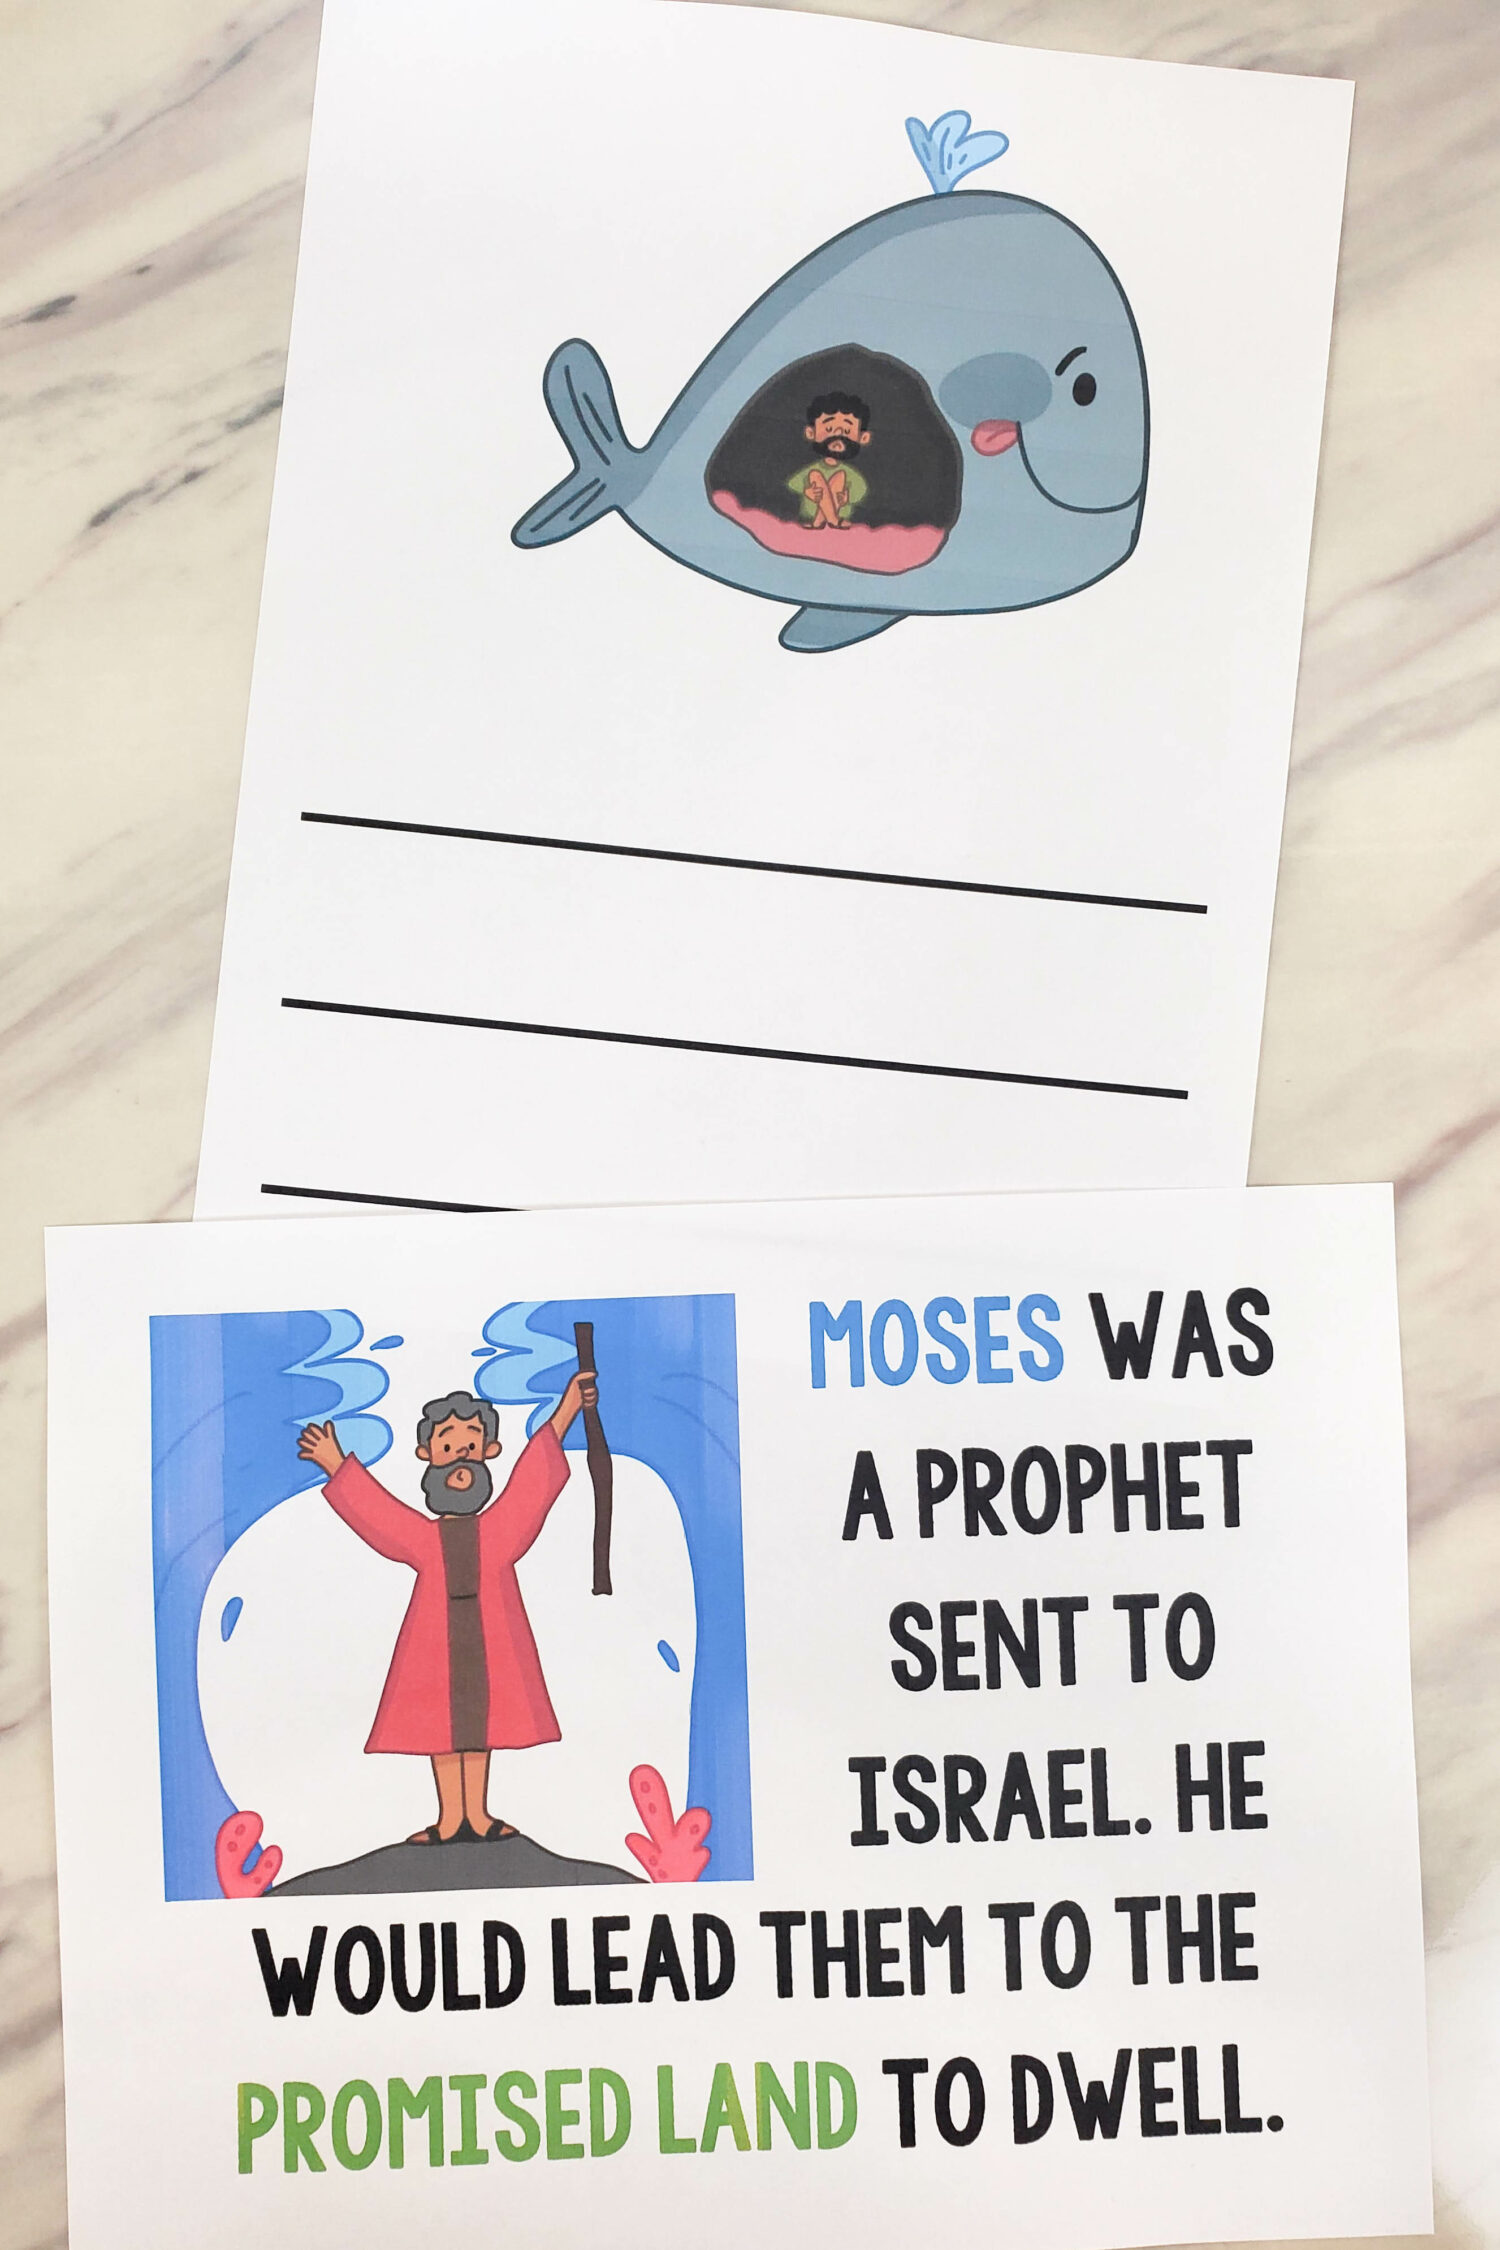 Follow the Prophet Flip Chart for this Primary song with custom art in both portrait and landscape singing time visual aids for LDS Primary music leaders.